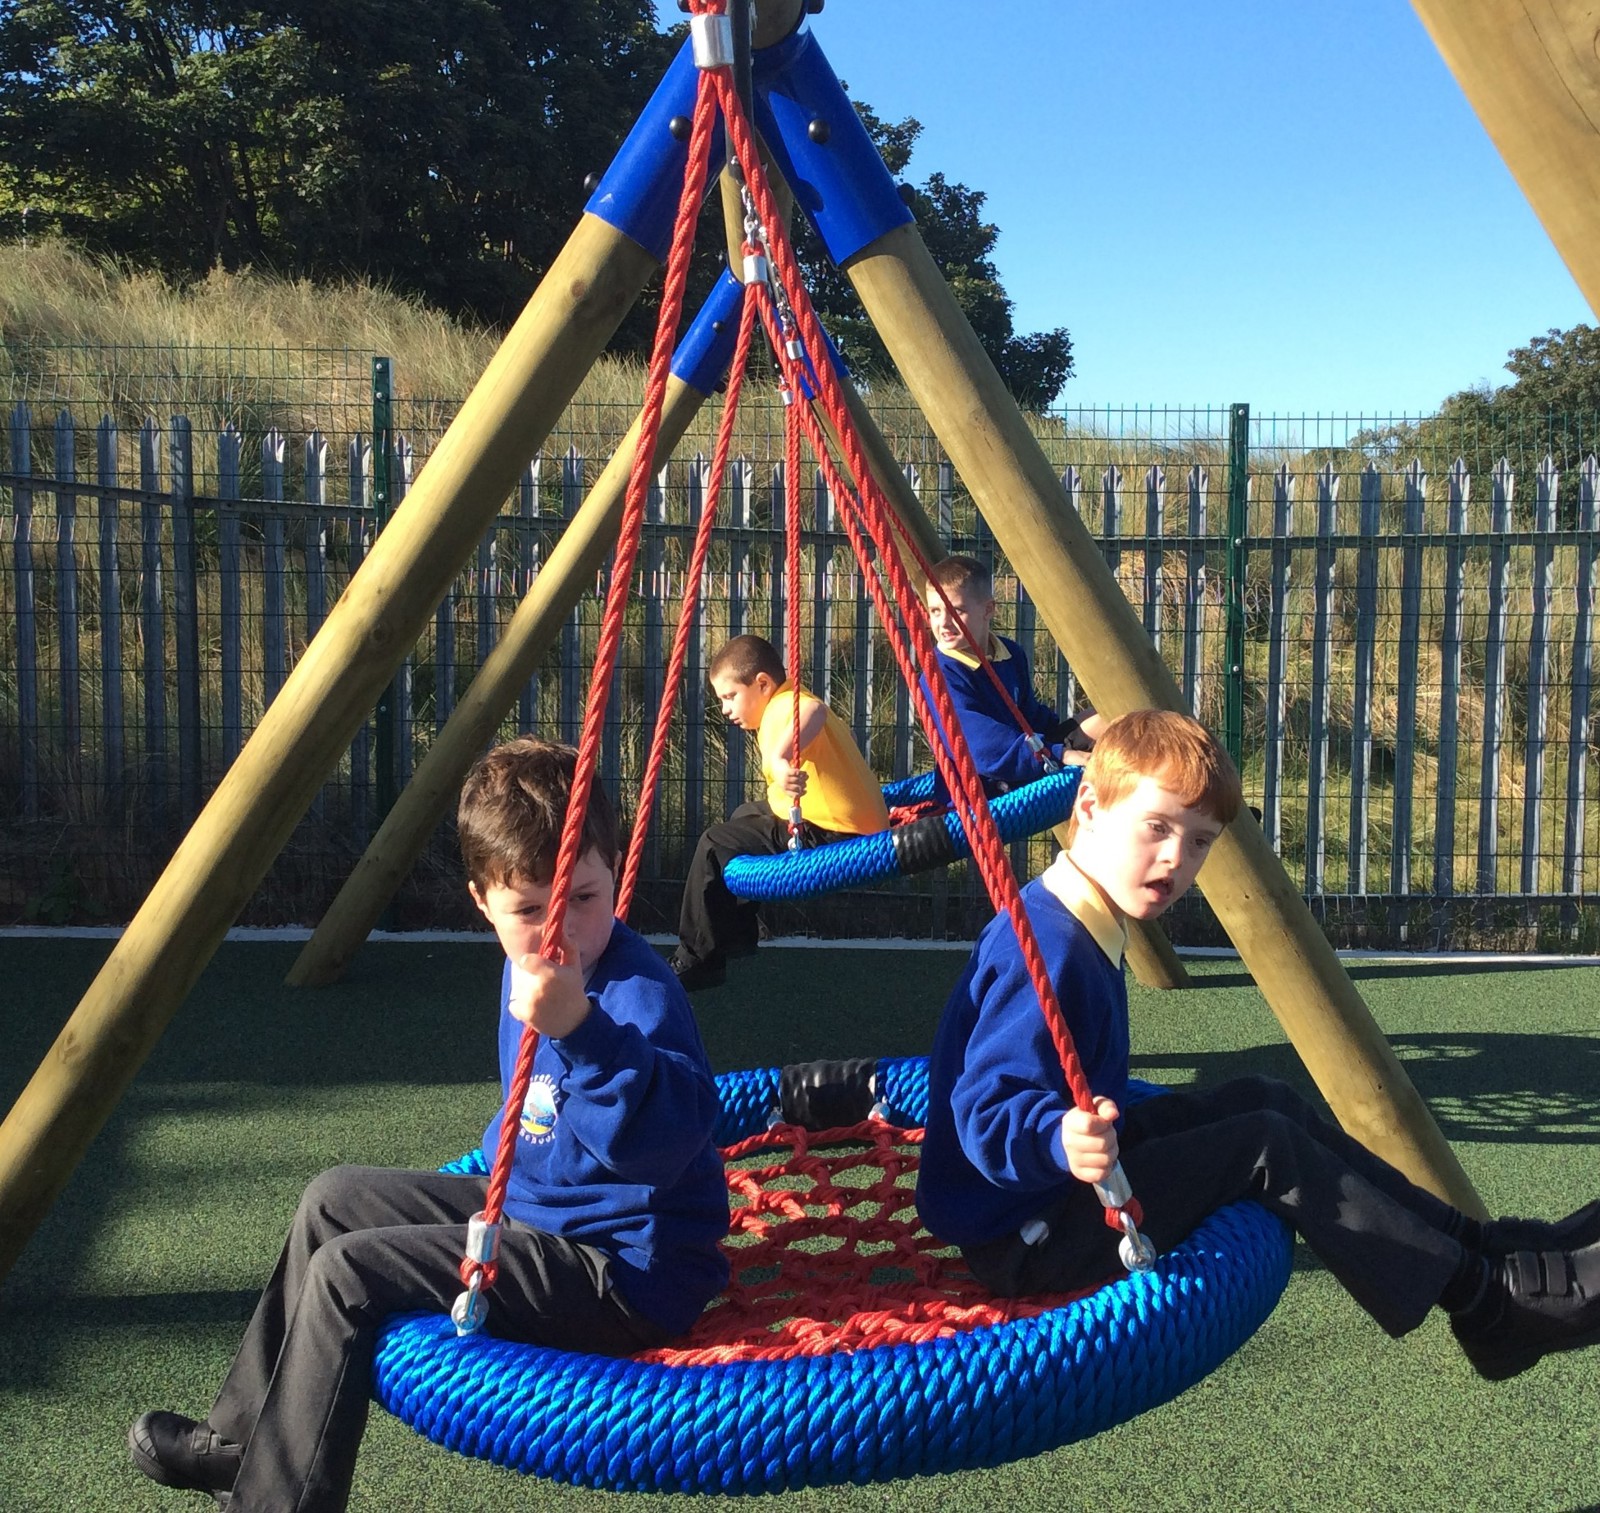 Two school boys sitting on a swing in the playground at Merefield School